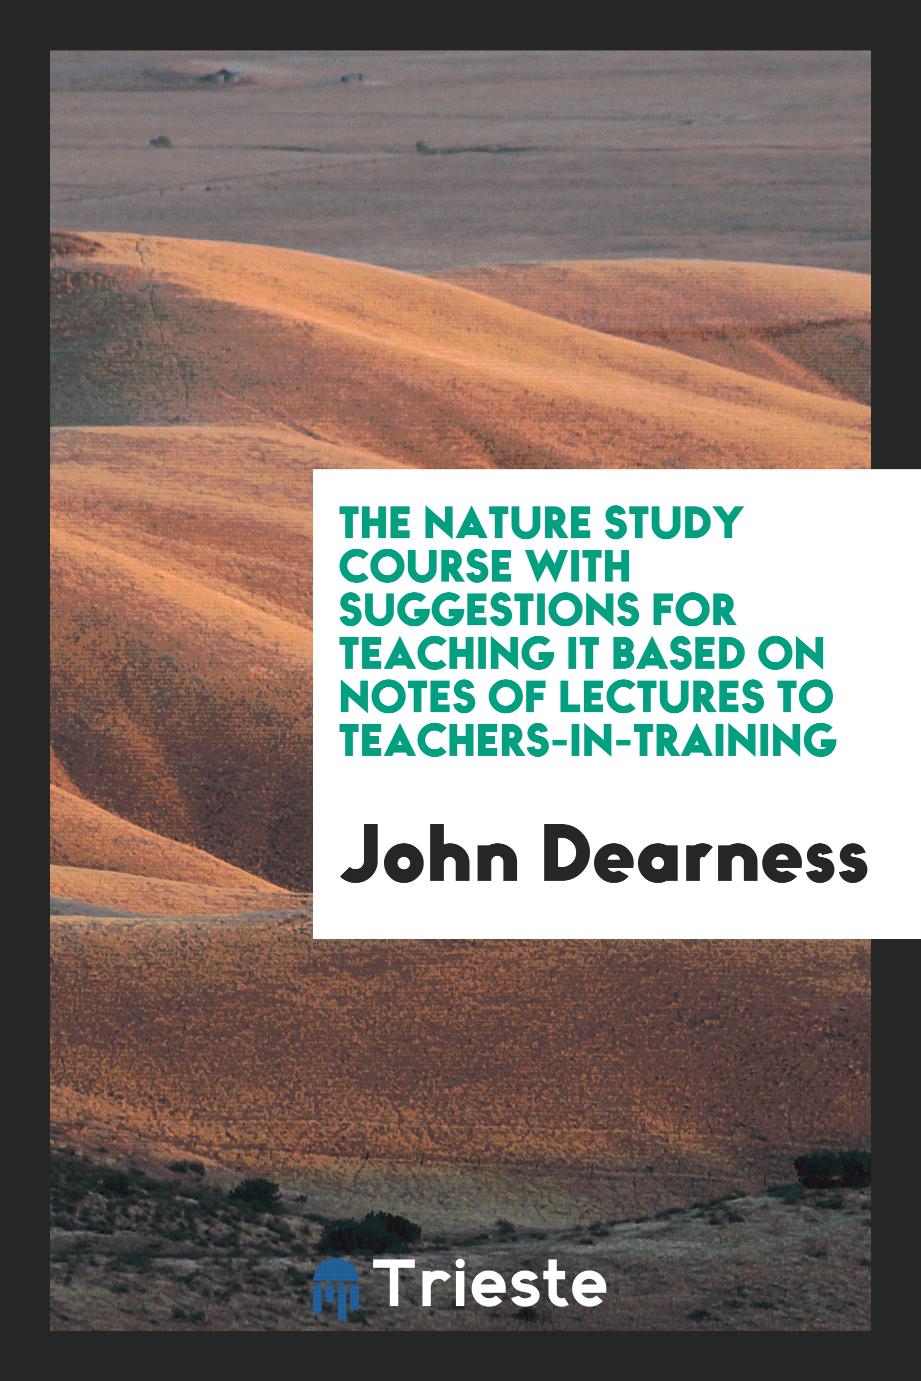 The nature study course with suggestions for teaching it based on notes of lectures to teachers-in-training